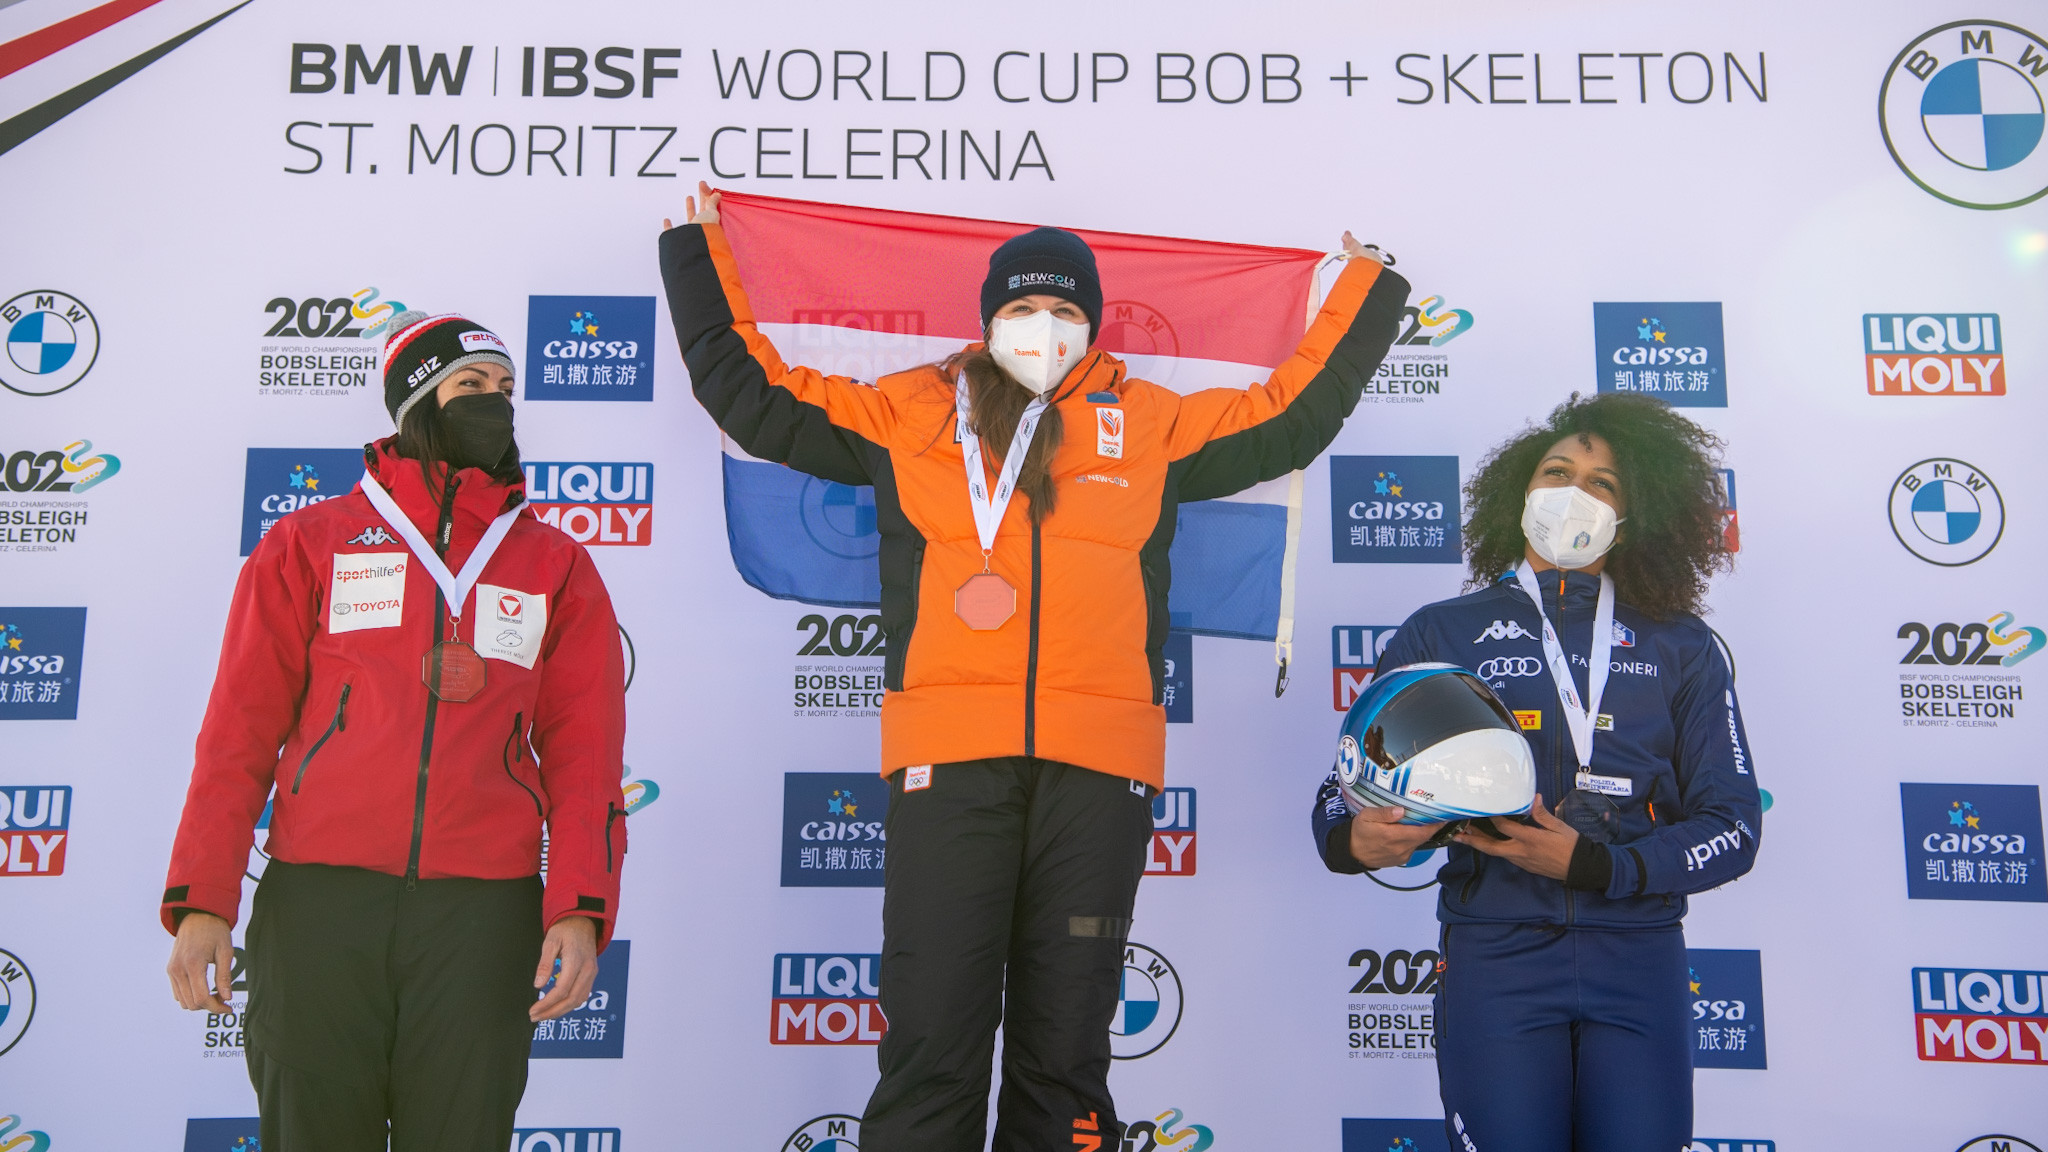 Bos wins first IBSF World Cup title while Dukurs claims 11th in St Moritz